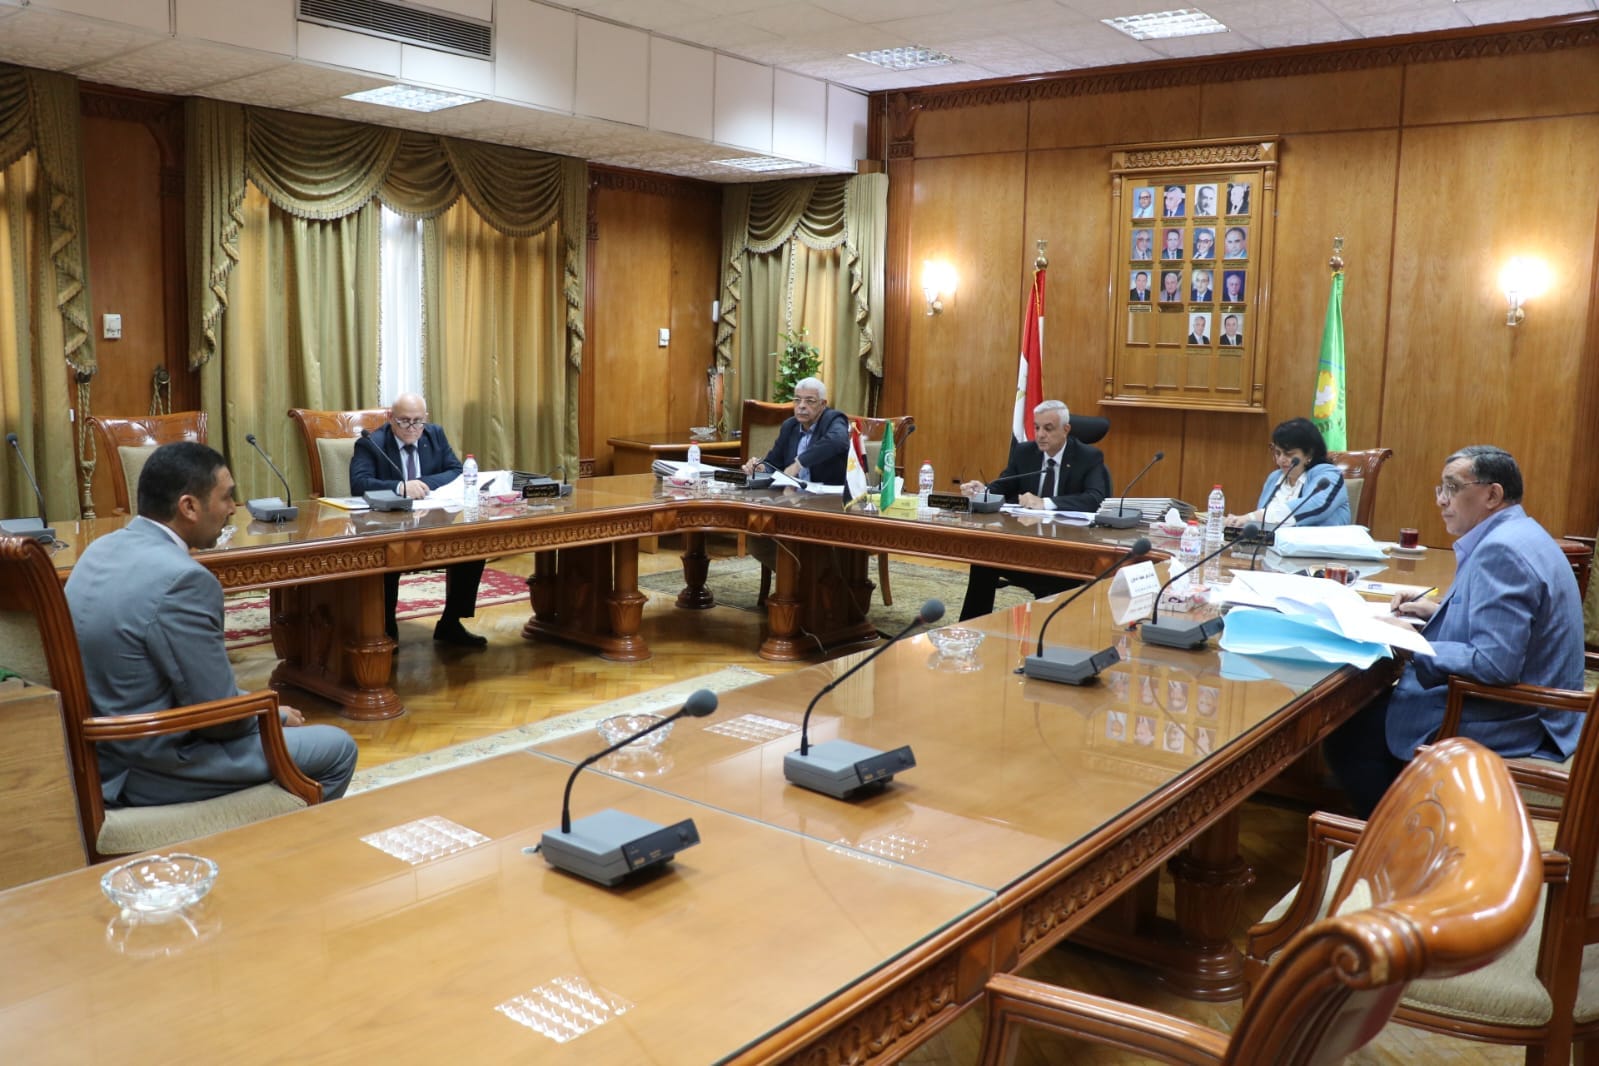 A committee to conduct personal interviews for applicants for the position of Director of Administration at Menoufia University concludes its work today.